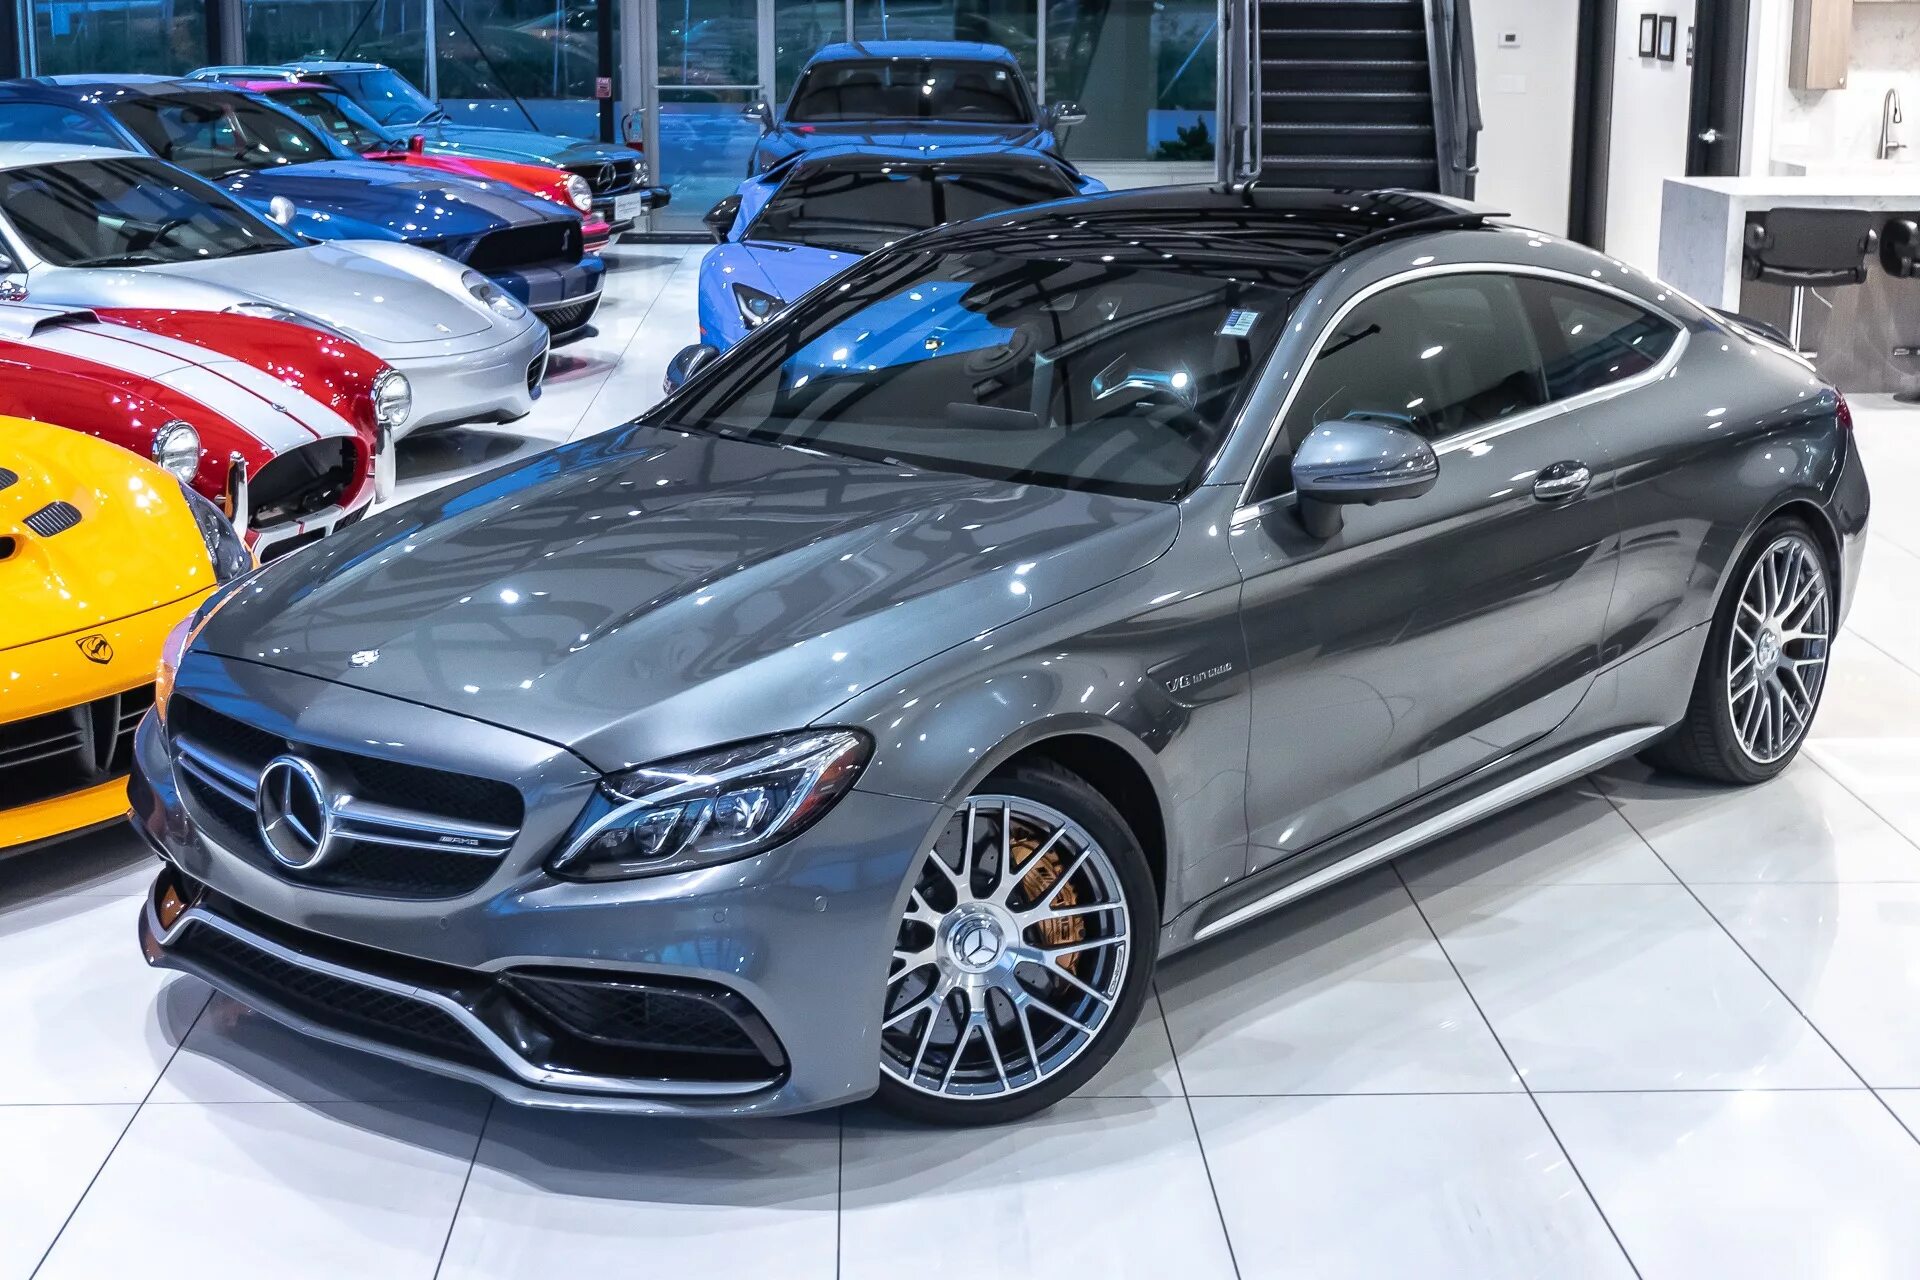 Mercedes s63 AMG Coupe. C63s AMG Coupe. Mercedes c63s AMG Coupe. Мерседес-Бенц s63 АМГ купе 2020.